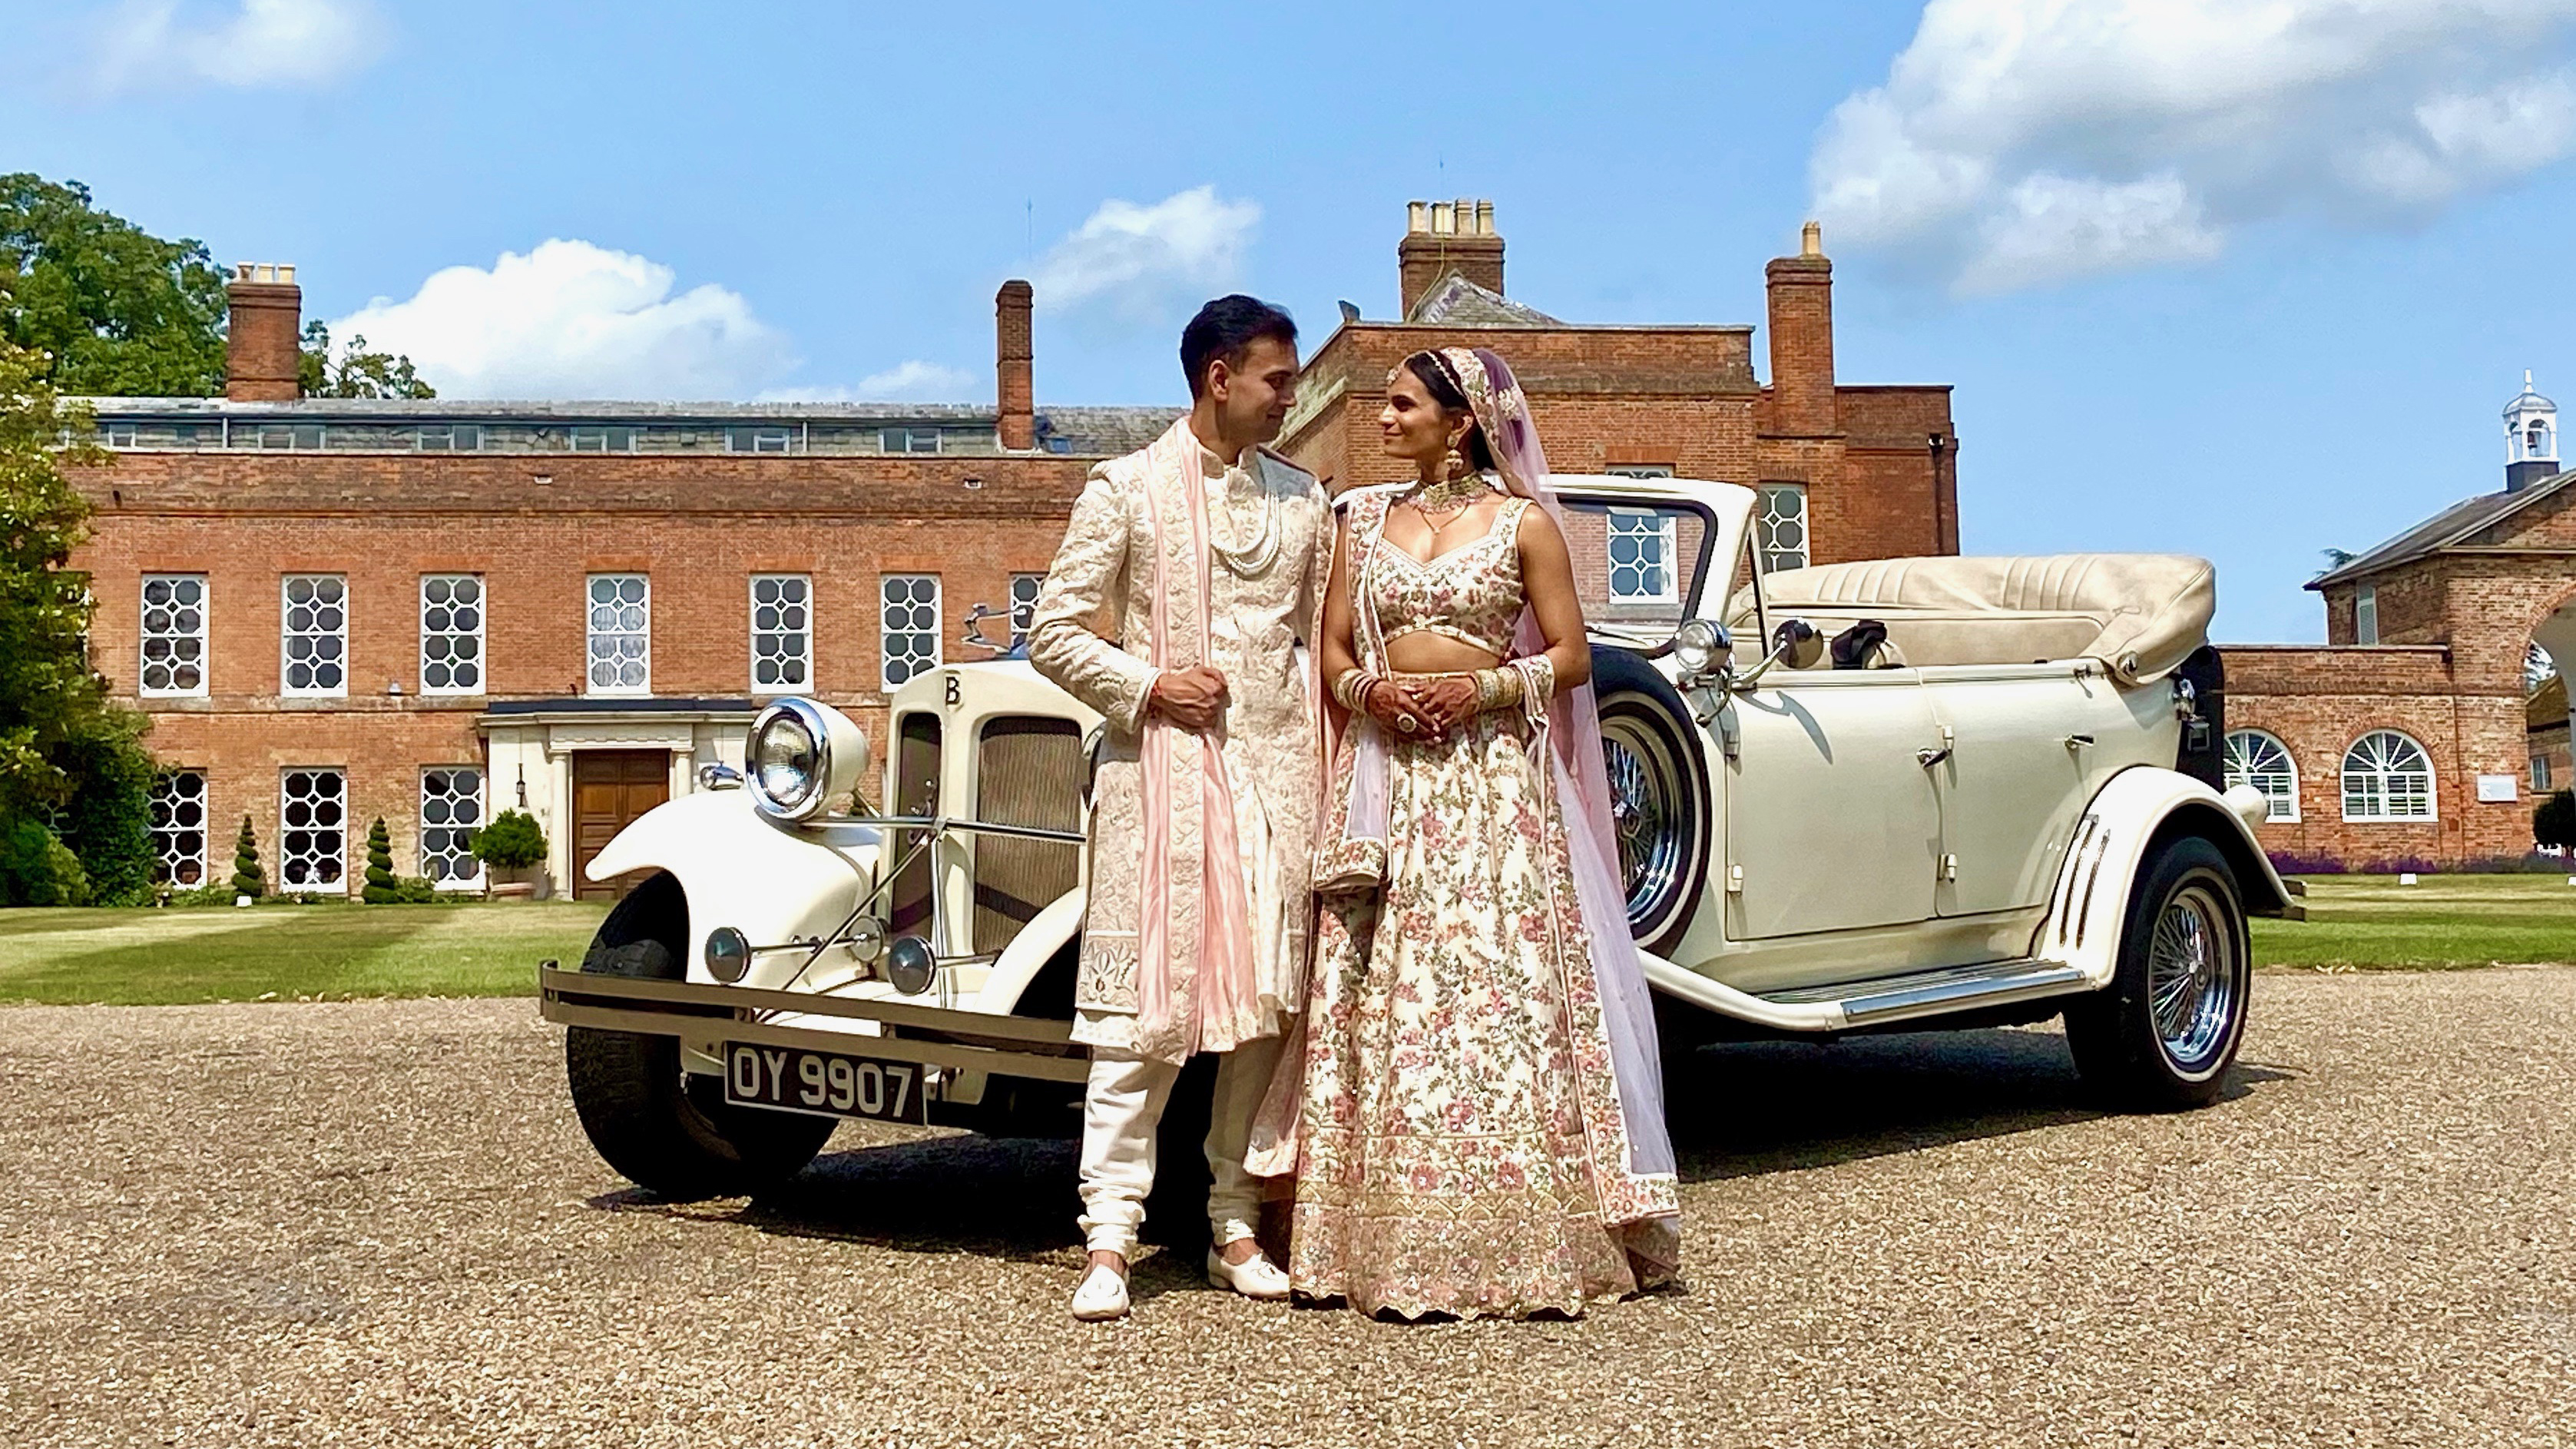 Convertible vintage style Beauford with roof down with newly wed Asian couple standing in front of the vehicle looking at each others. Vehicle is parked in front of a large manor house in Worcester Park